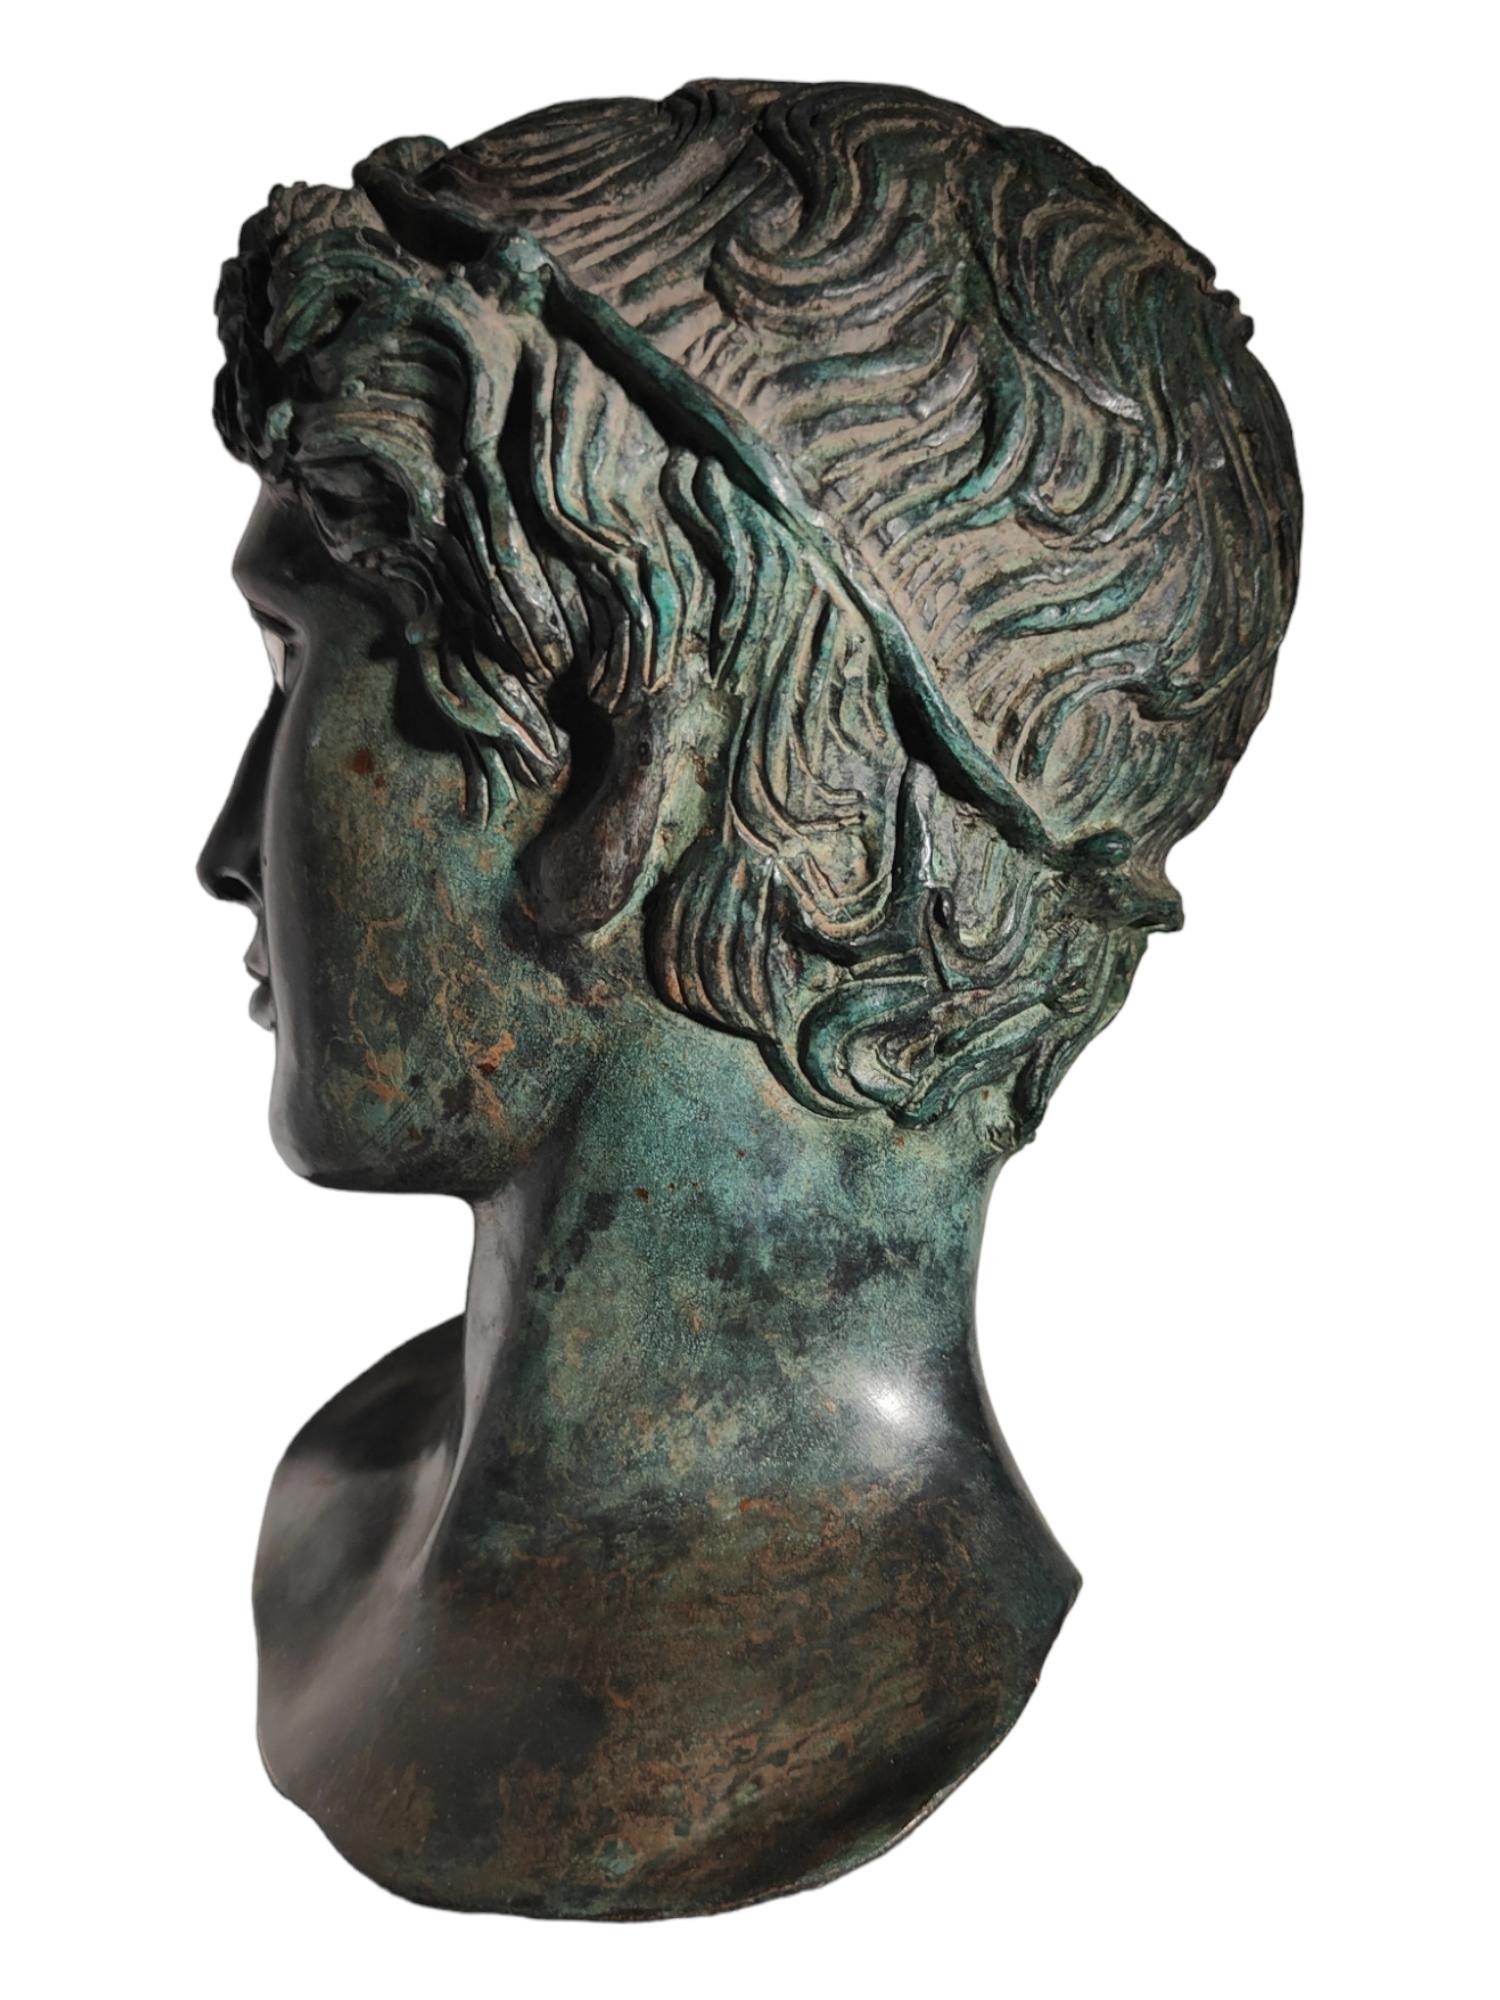 Greek Bust In Bronze XIX century
VERY DECORATIVE BRONZE BUST REPRESENTING A YOUNG GREEK FROM THE END OF THE XIX CENTURY. THE BASE IS IN BLACK MARBLE AND THE EYES IN SILVER. REAL Size.